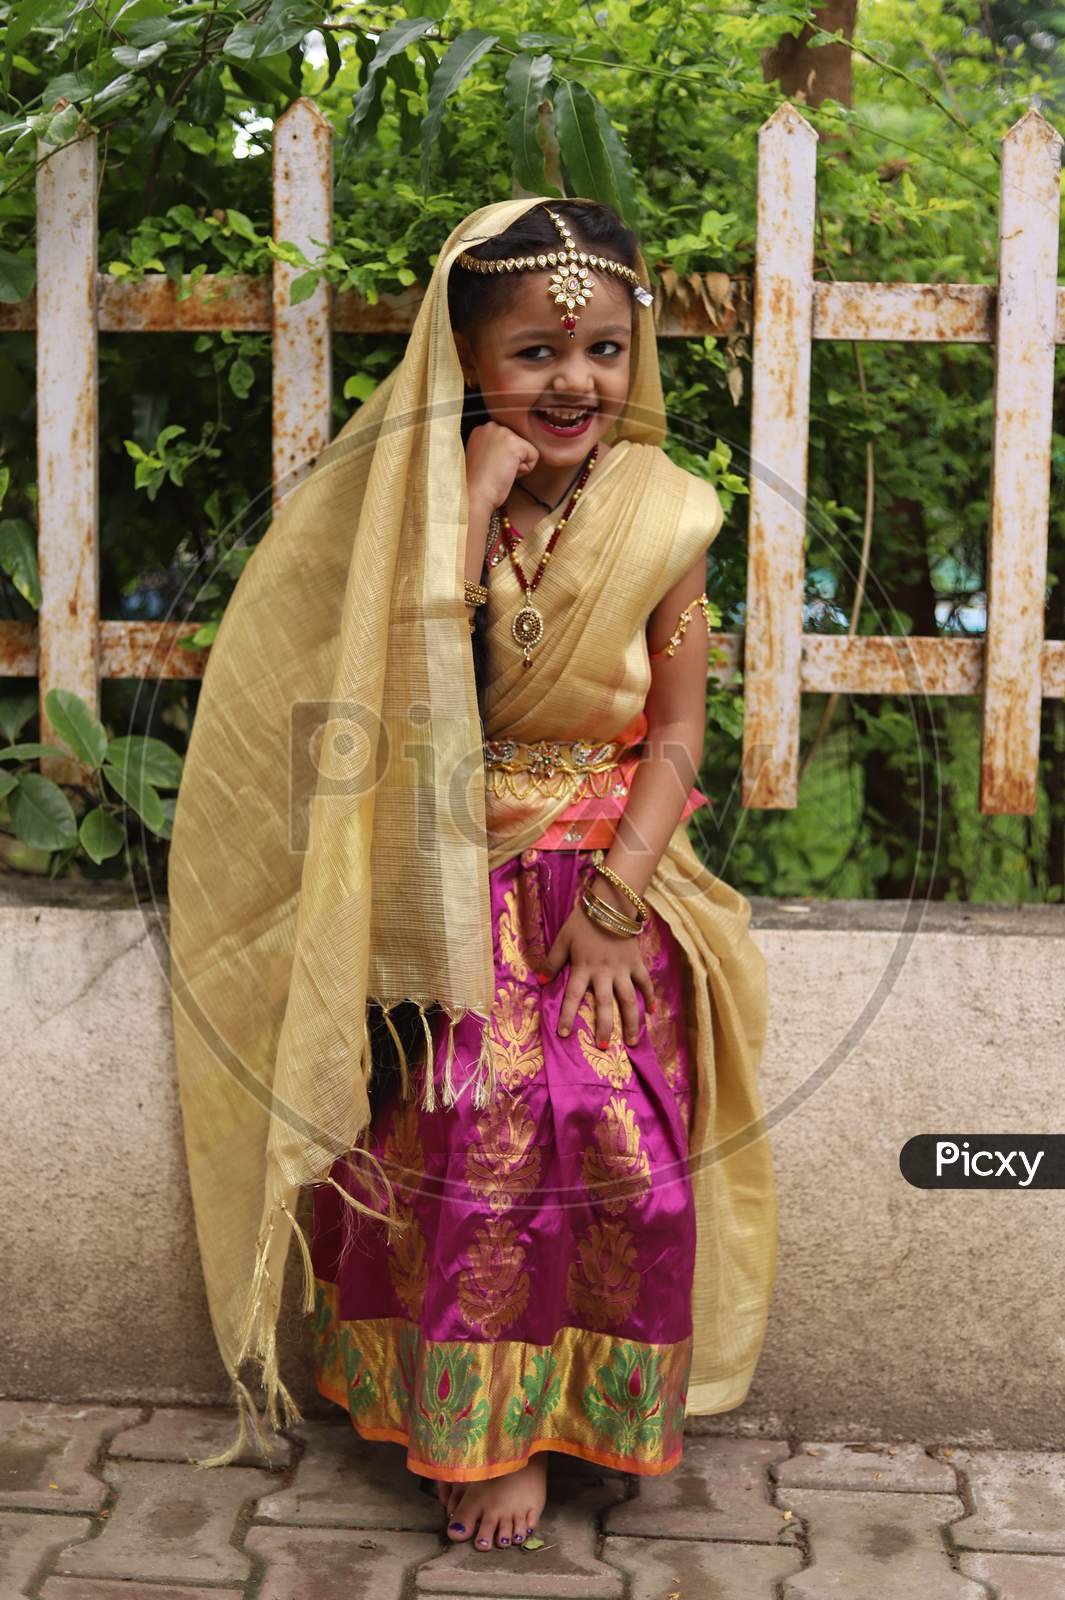 Cute little girl dressed in traditional Indian sari to celebrate Indian festivals.